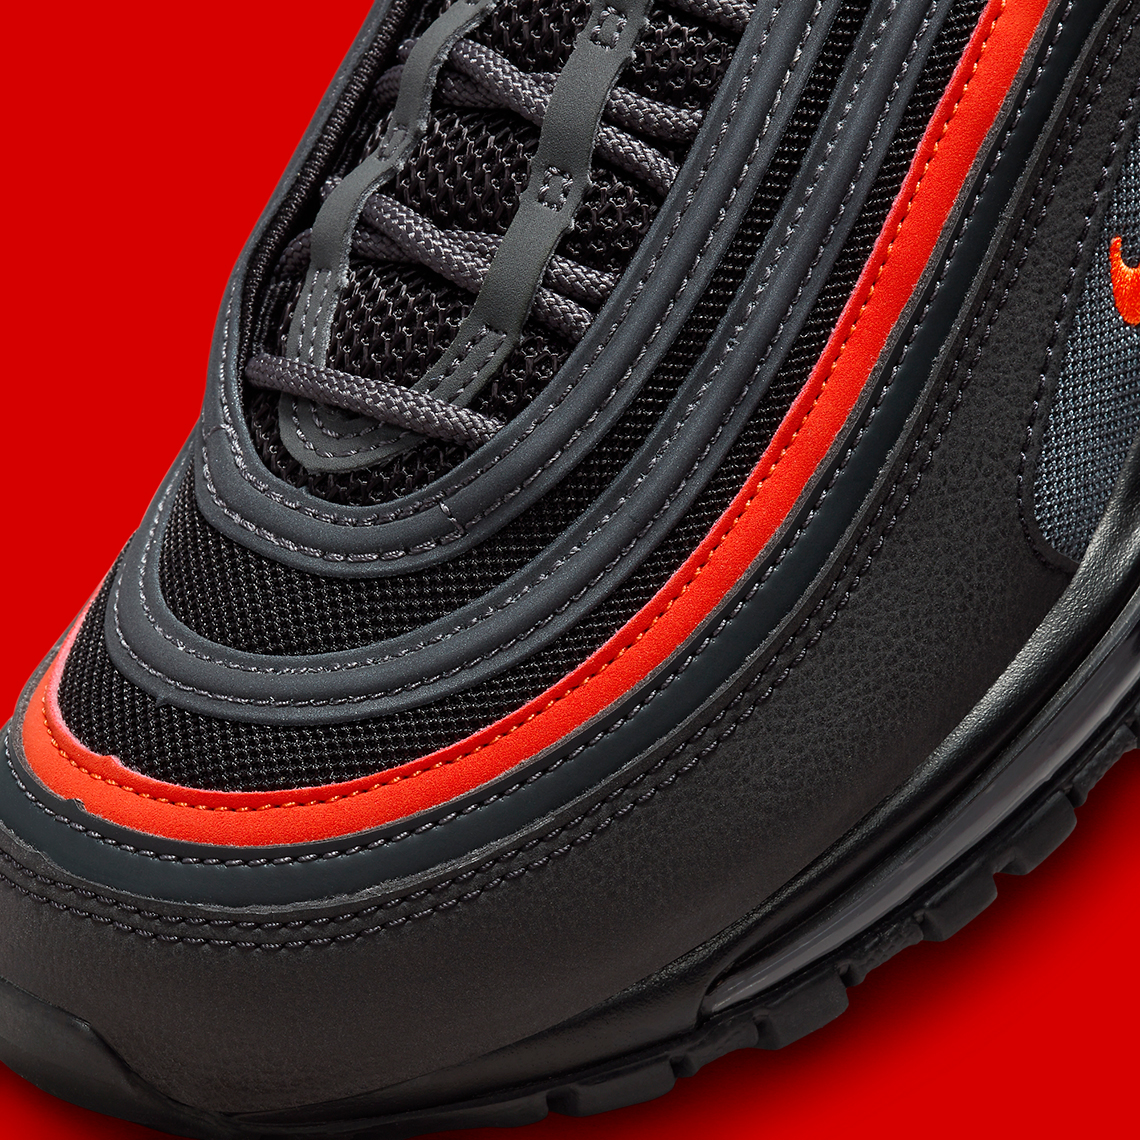 nike air max 97 black picante red anthracite 921826 018 4